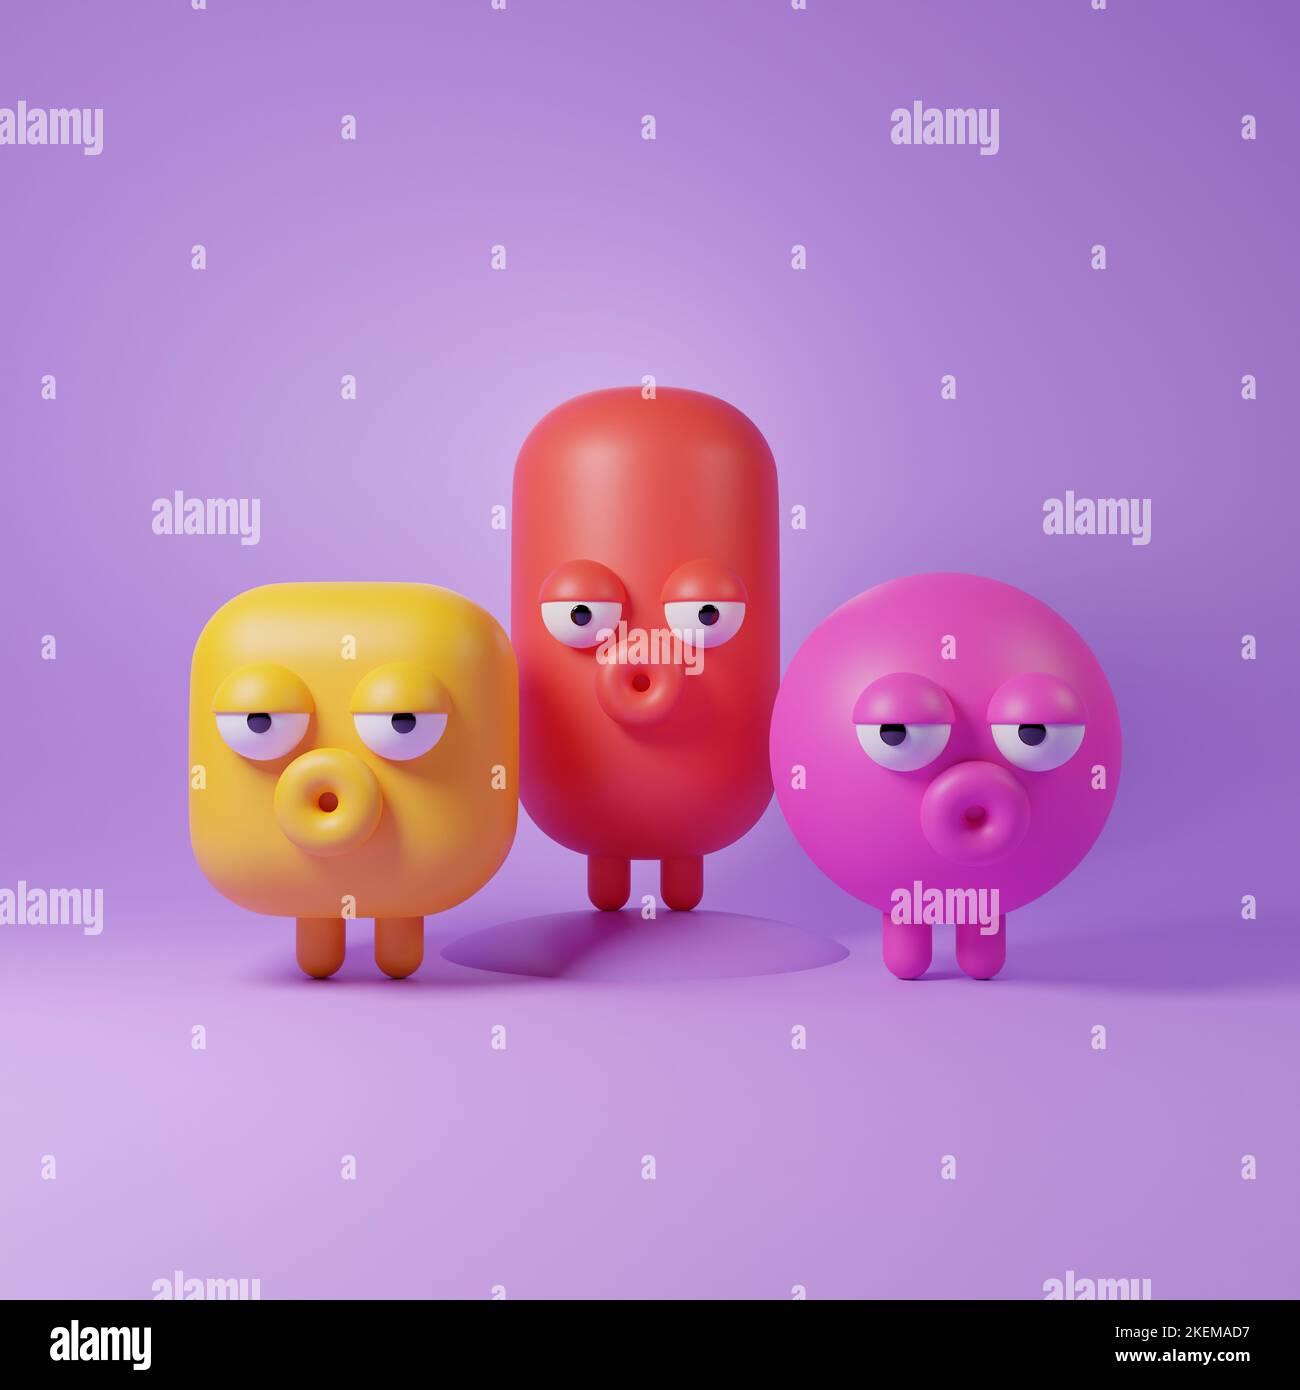 Emotion dull brothers, yellow, red and pink dull monsters on purple background. 3d rendering Stock Photo